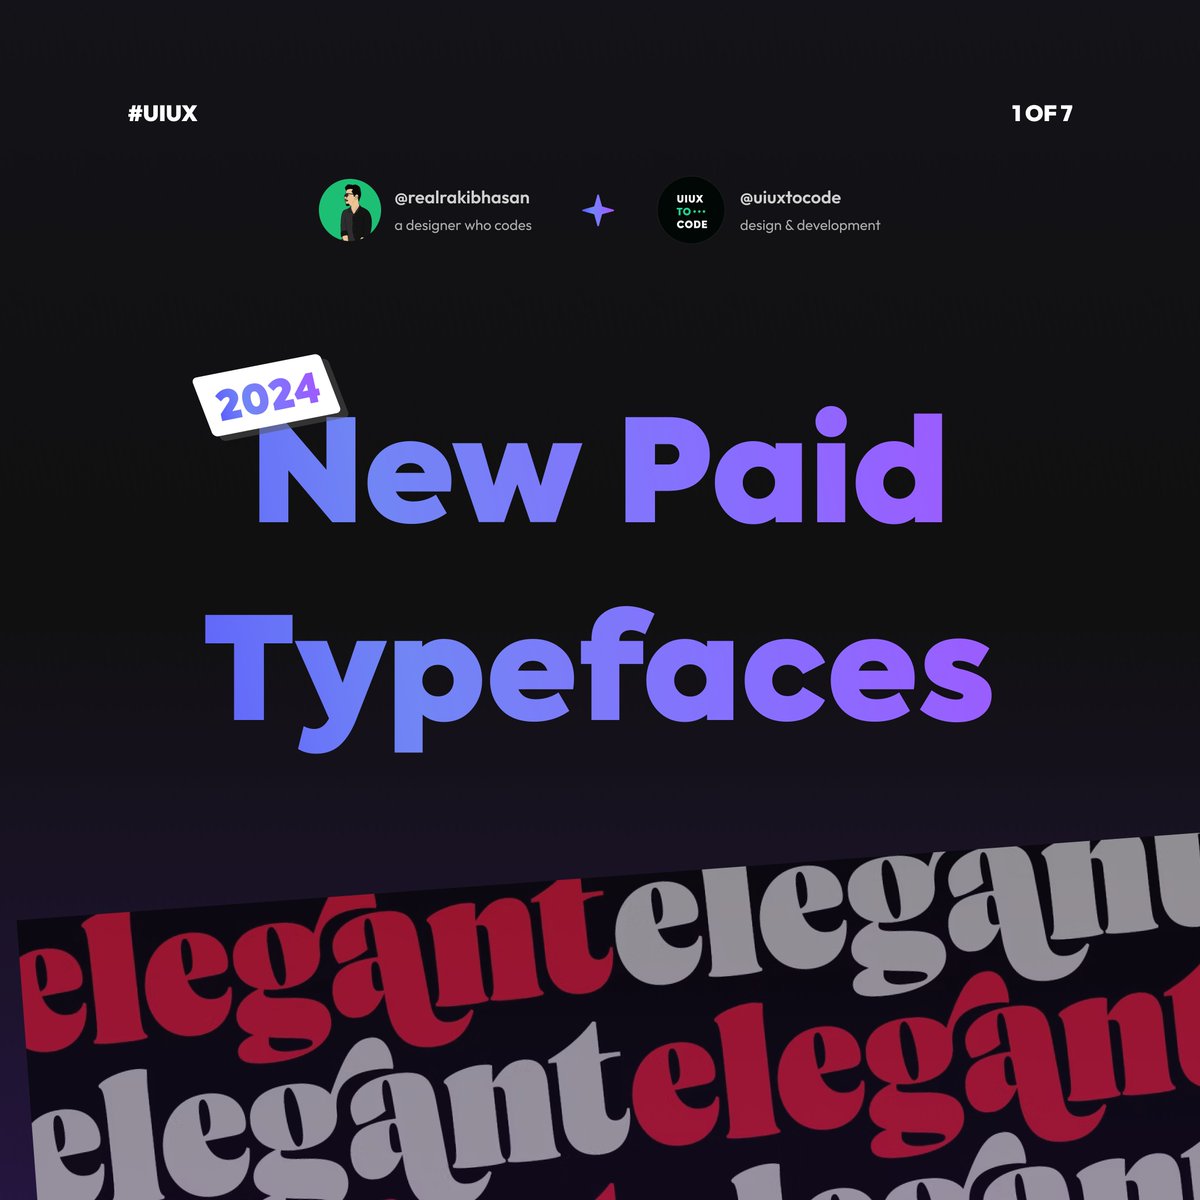 🧵 A Thread
New Paid Typefaces In 2024!

What’s your most favorite? 
Would you ever want to buy any of these expensive fonts? 


Let’s talk 👋 
zaap.bio/uiuxtocode

#ui #ux #uxdesign #uidesign #learnui #learnux #typeface #font #realrakibhasan #uiuxtocode